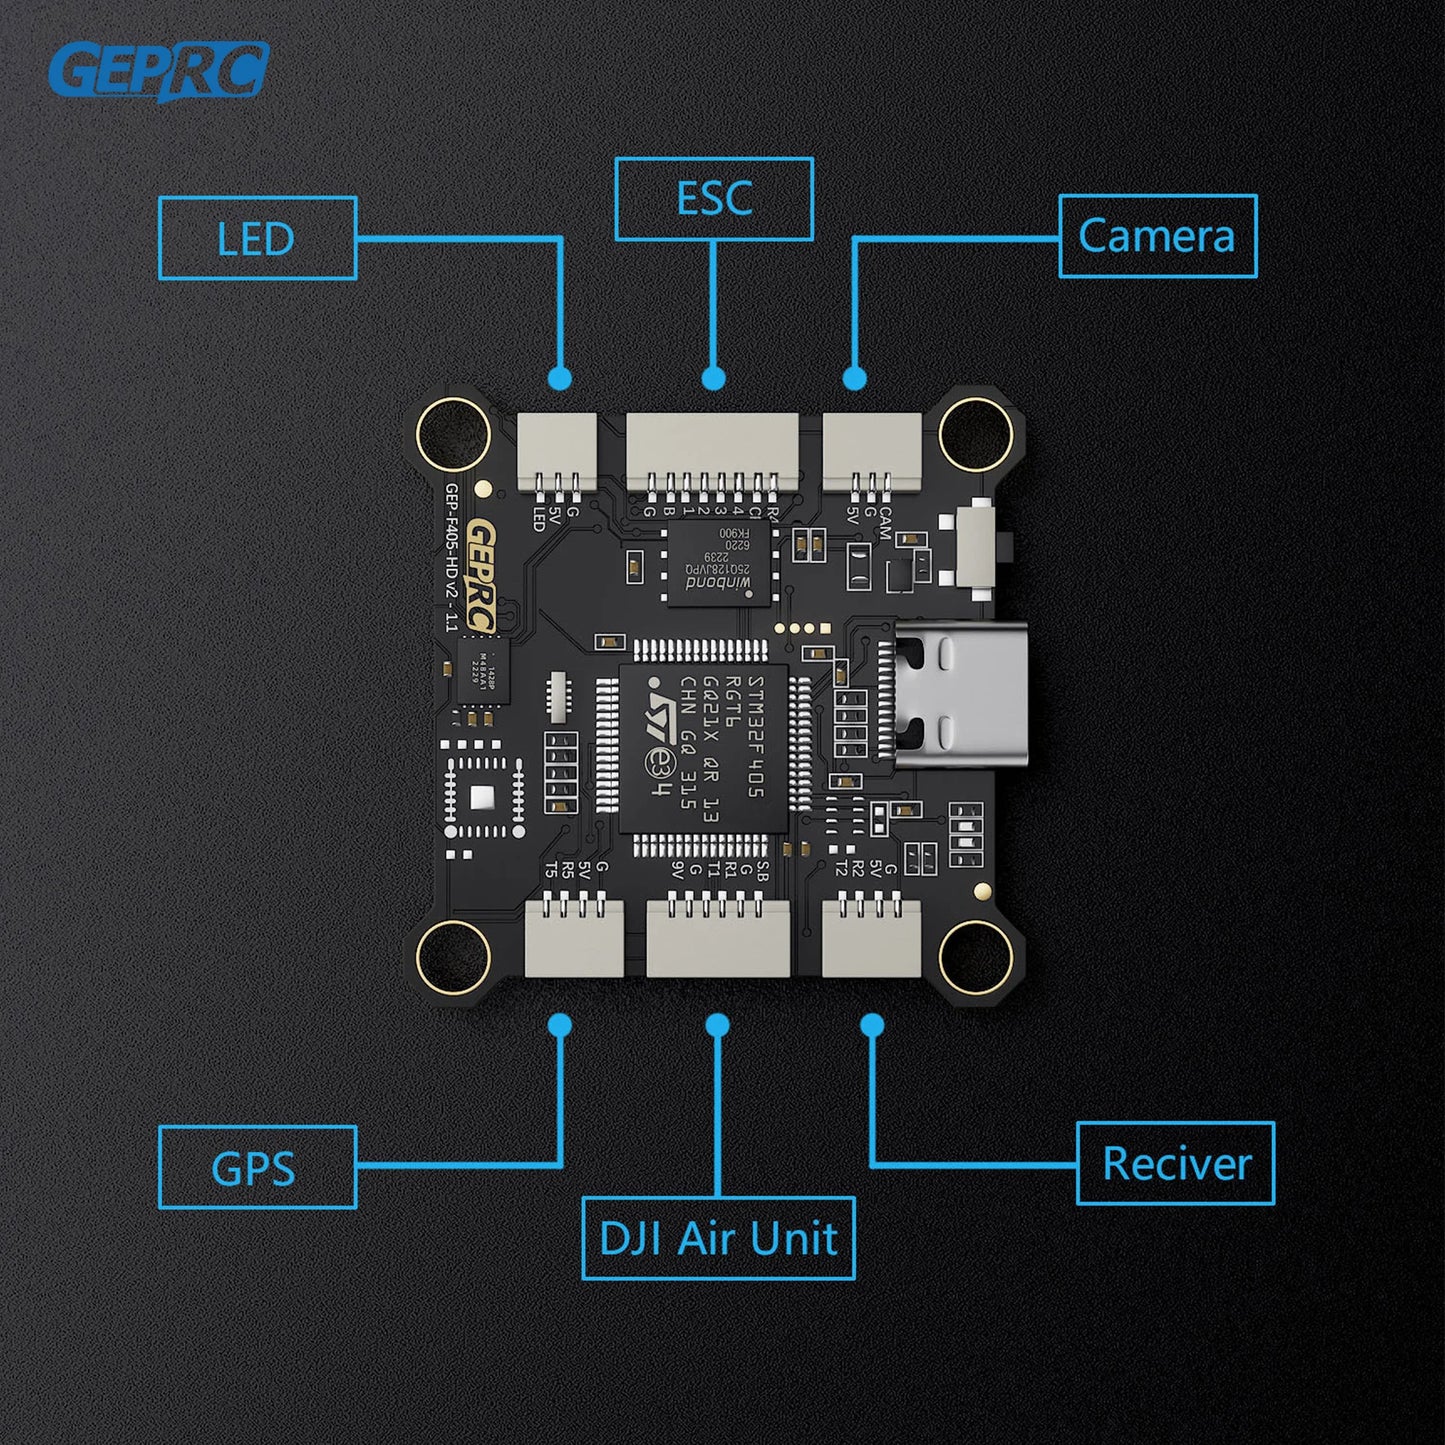 GEPRC TAKER F405 BLS 50A Stack - 42688-P Gyroscope 16MB  Black Box Data Analyze Record Flight Data Plug and Play Racing FPV Drone